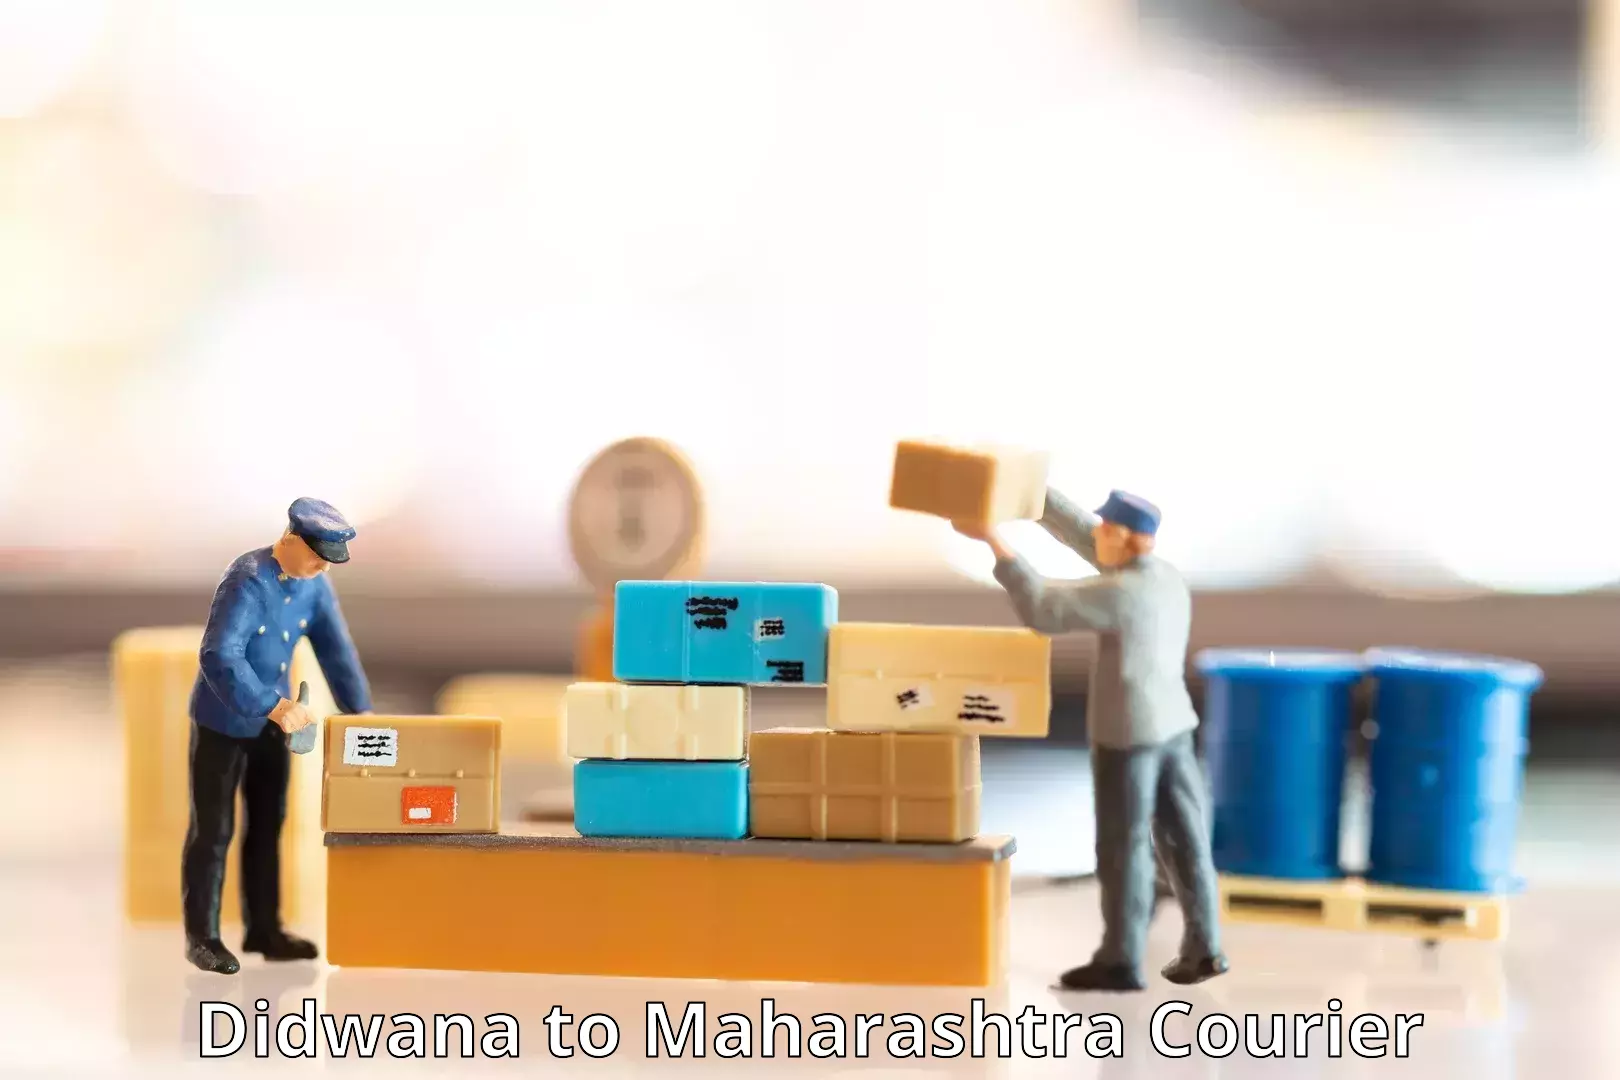 Courier services in Didwana to Alibag